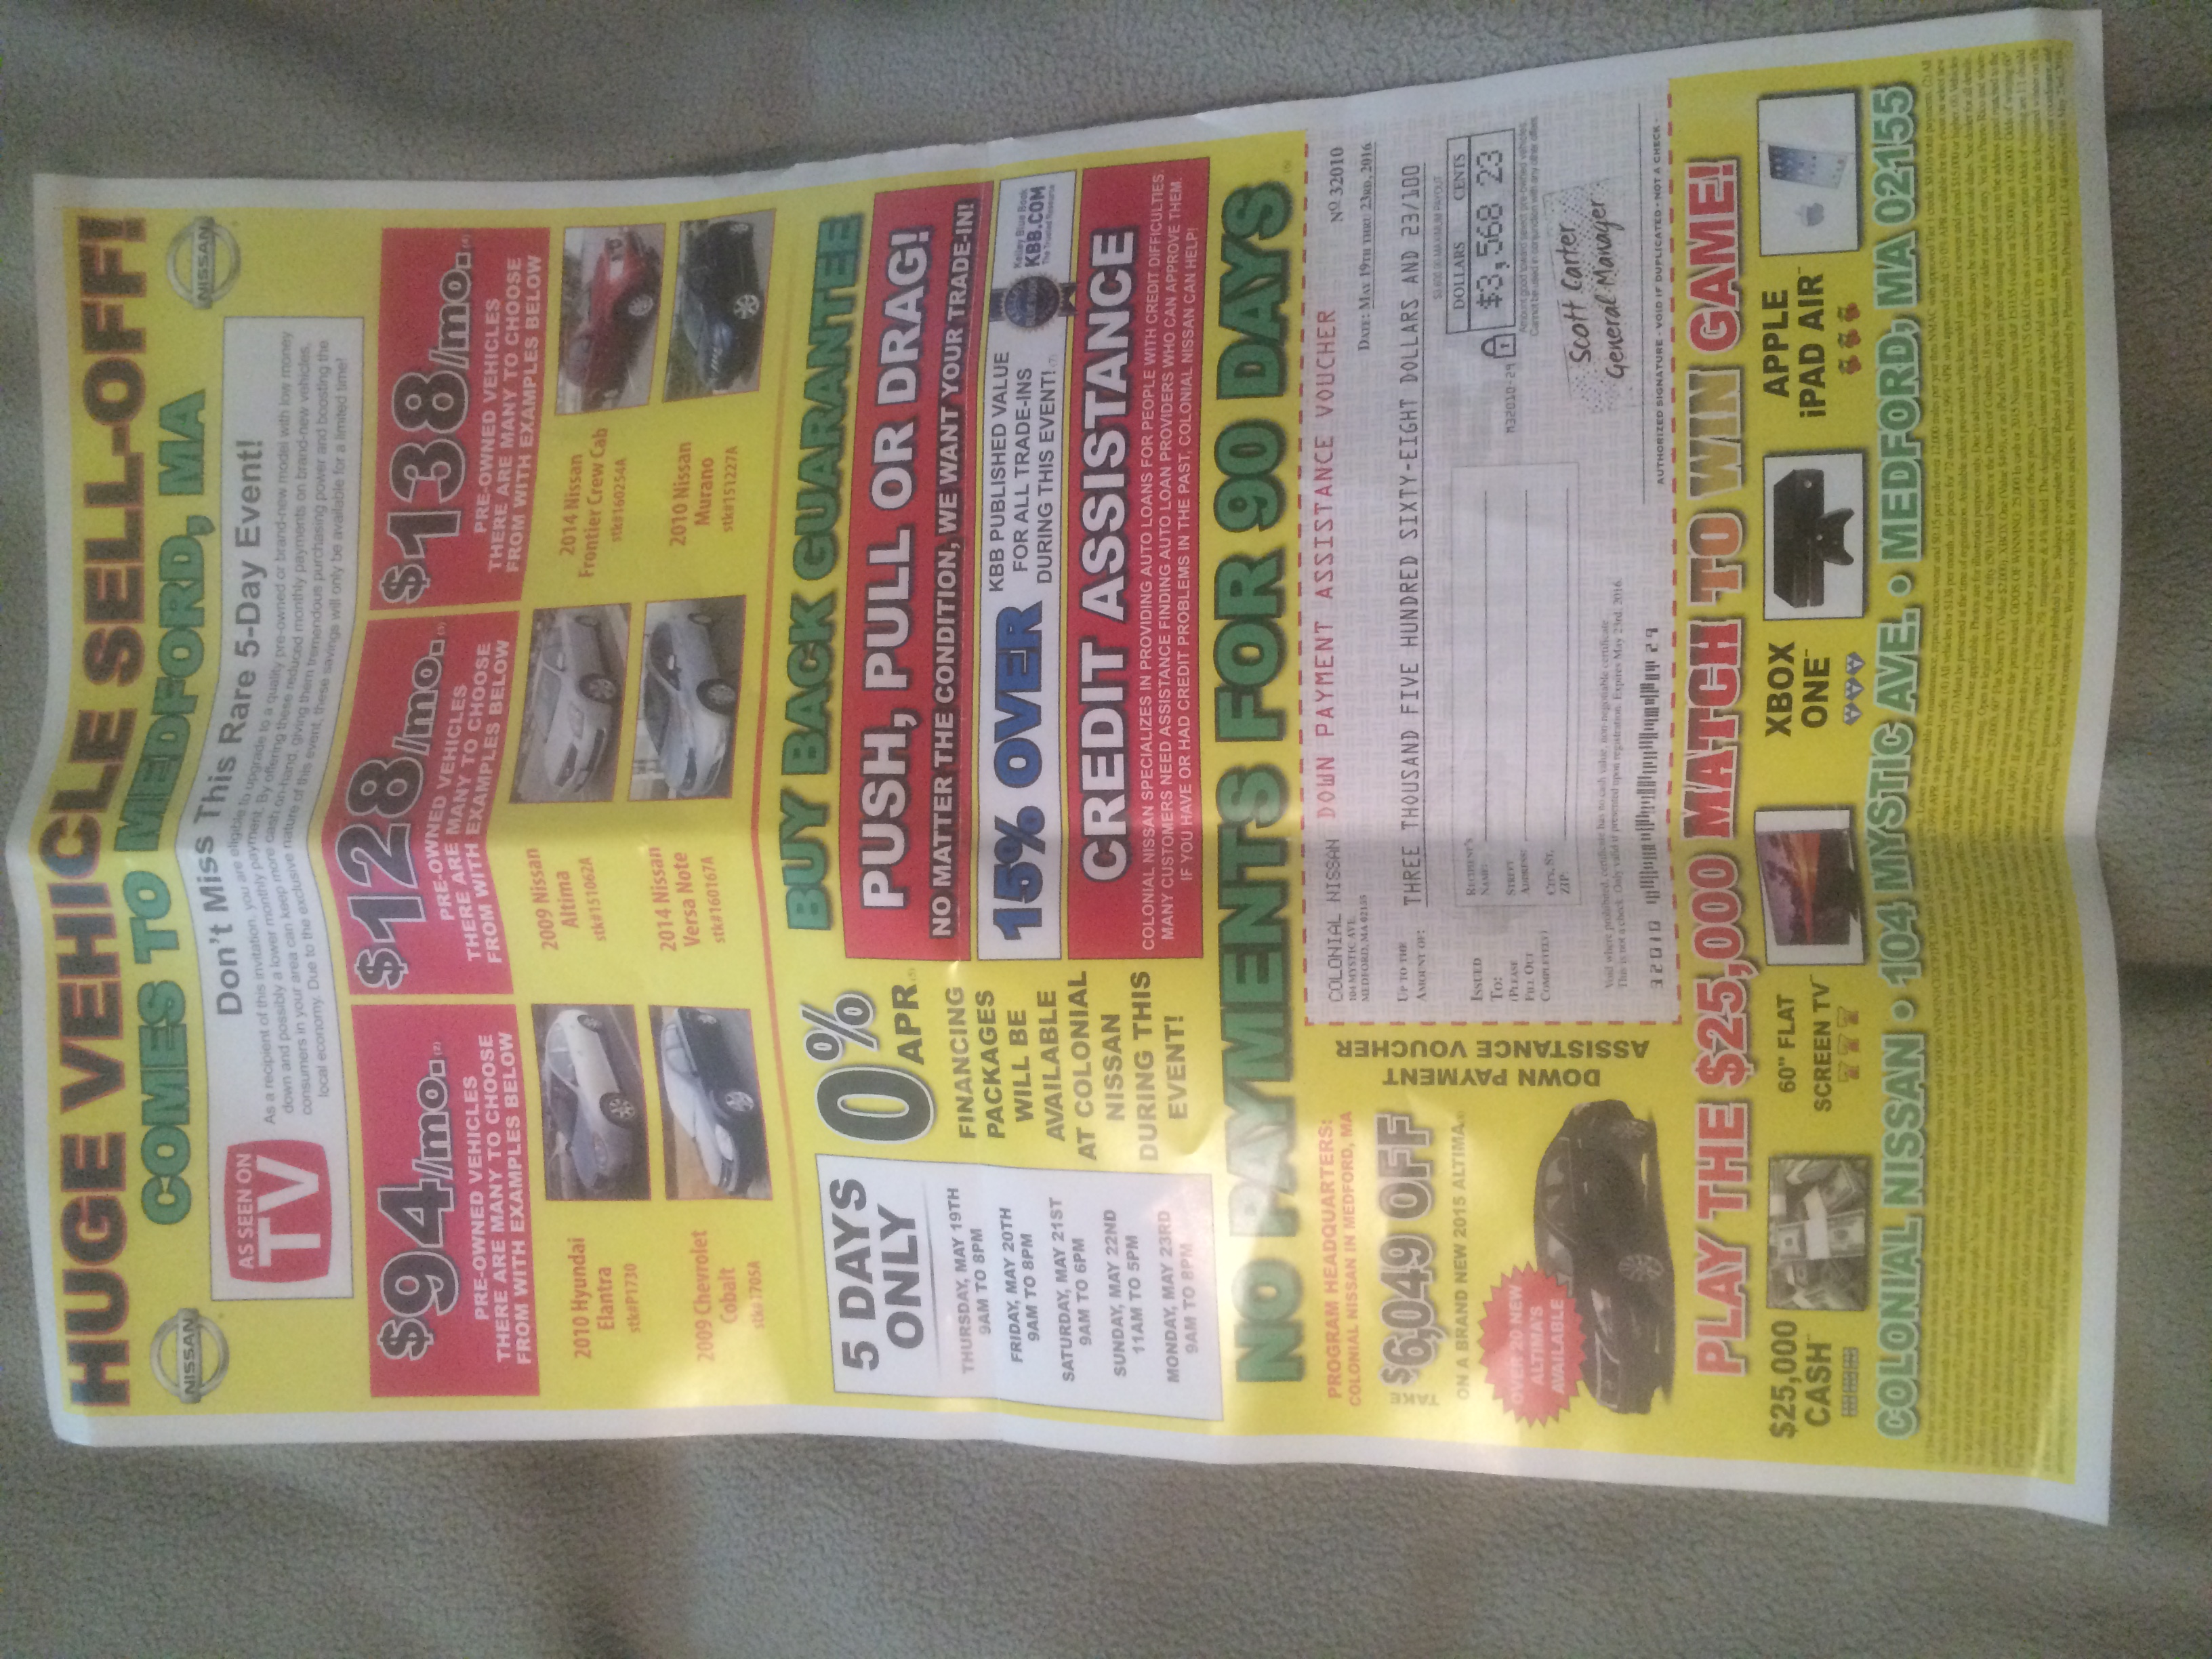 One side of the flyer received with 4 prizes listed.